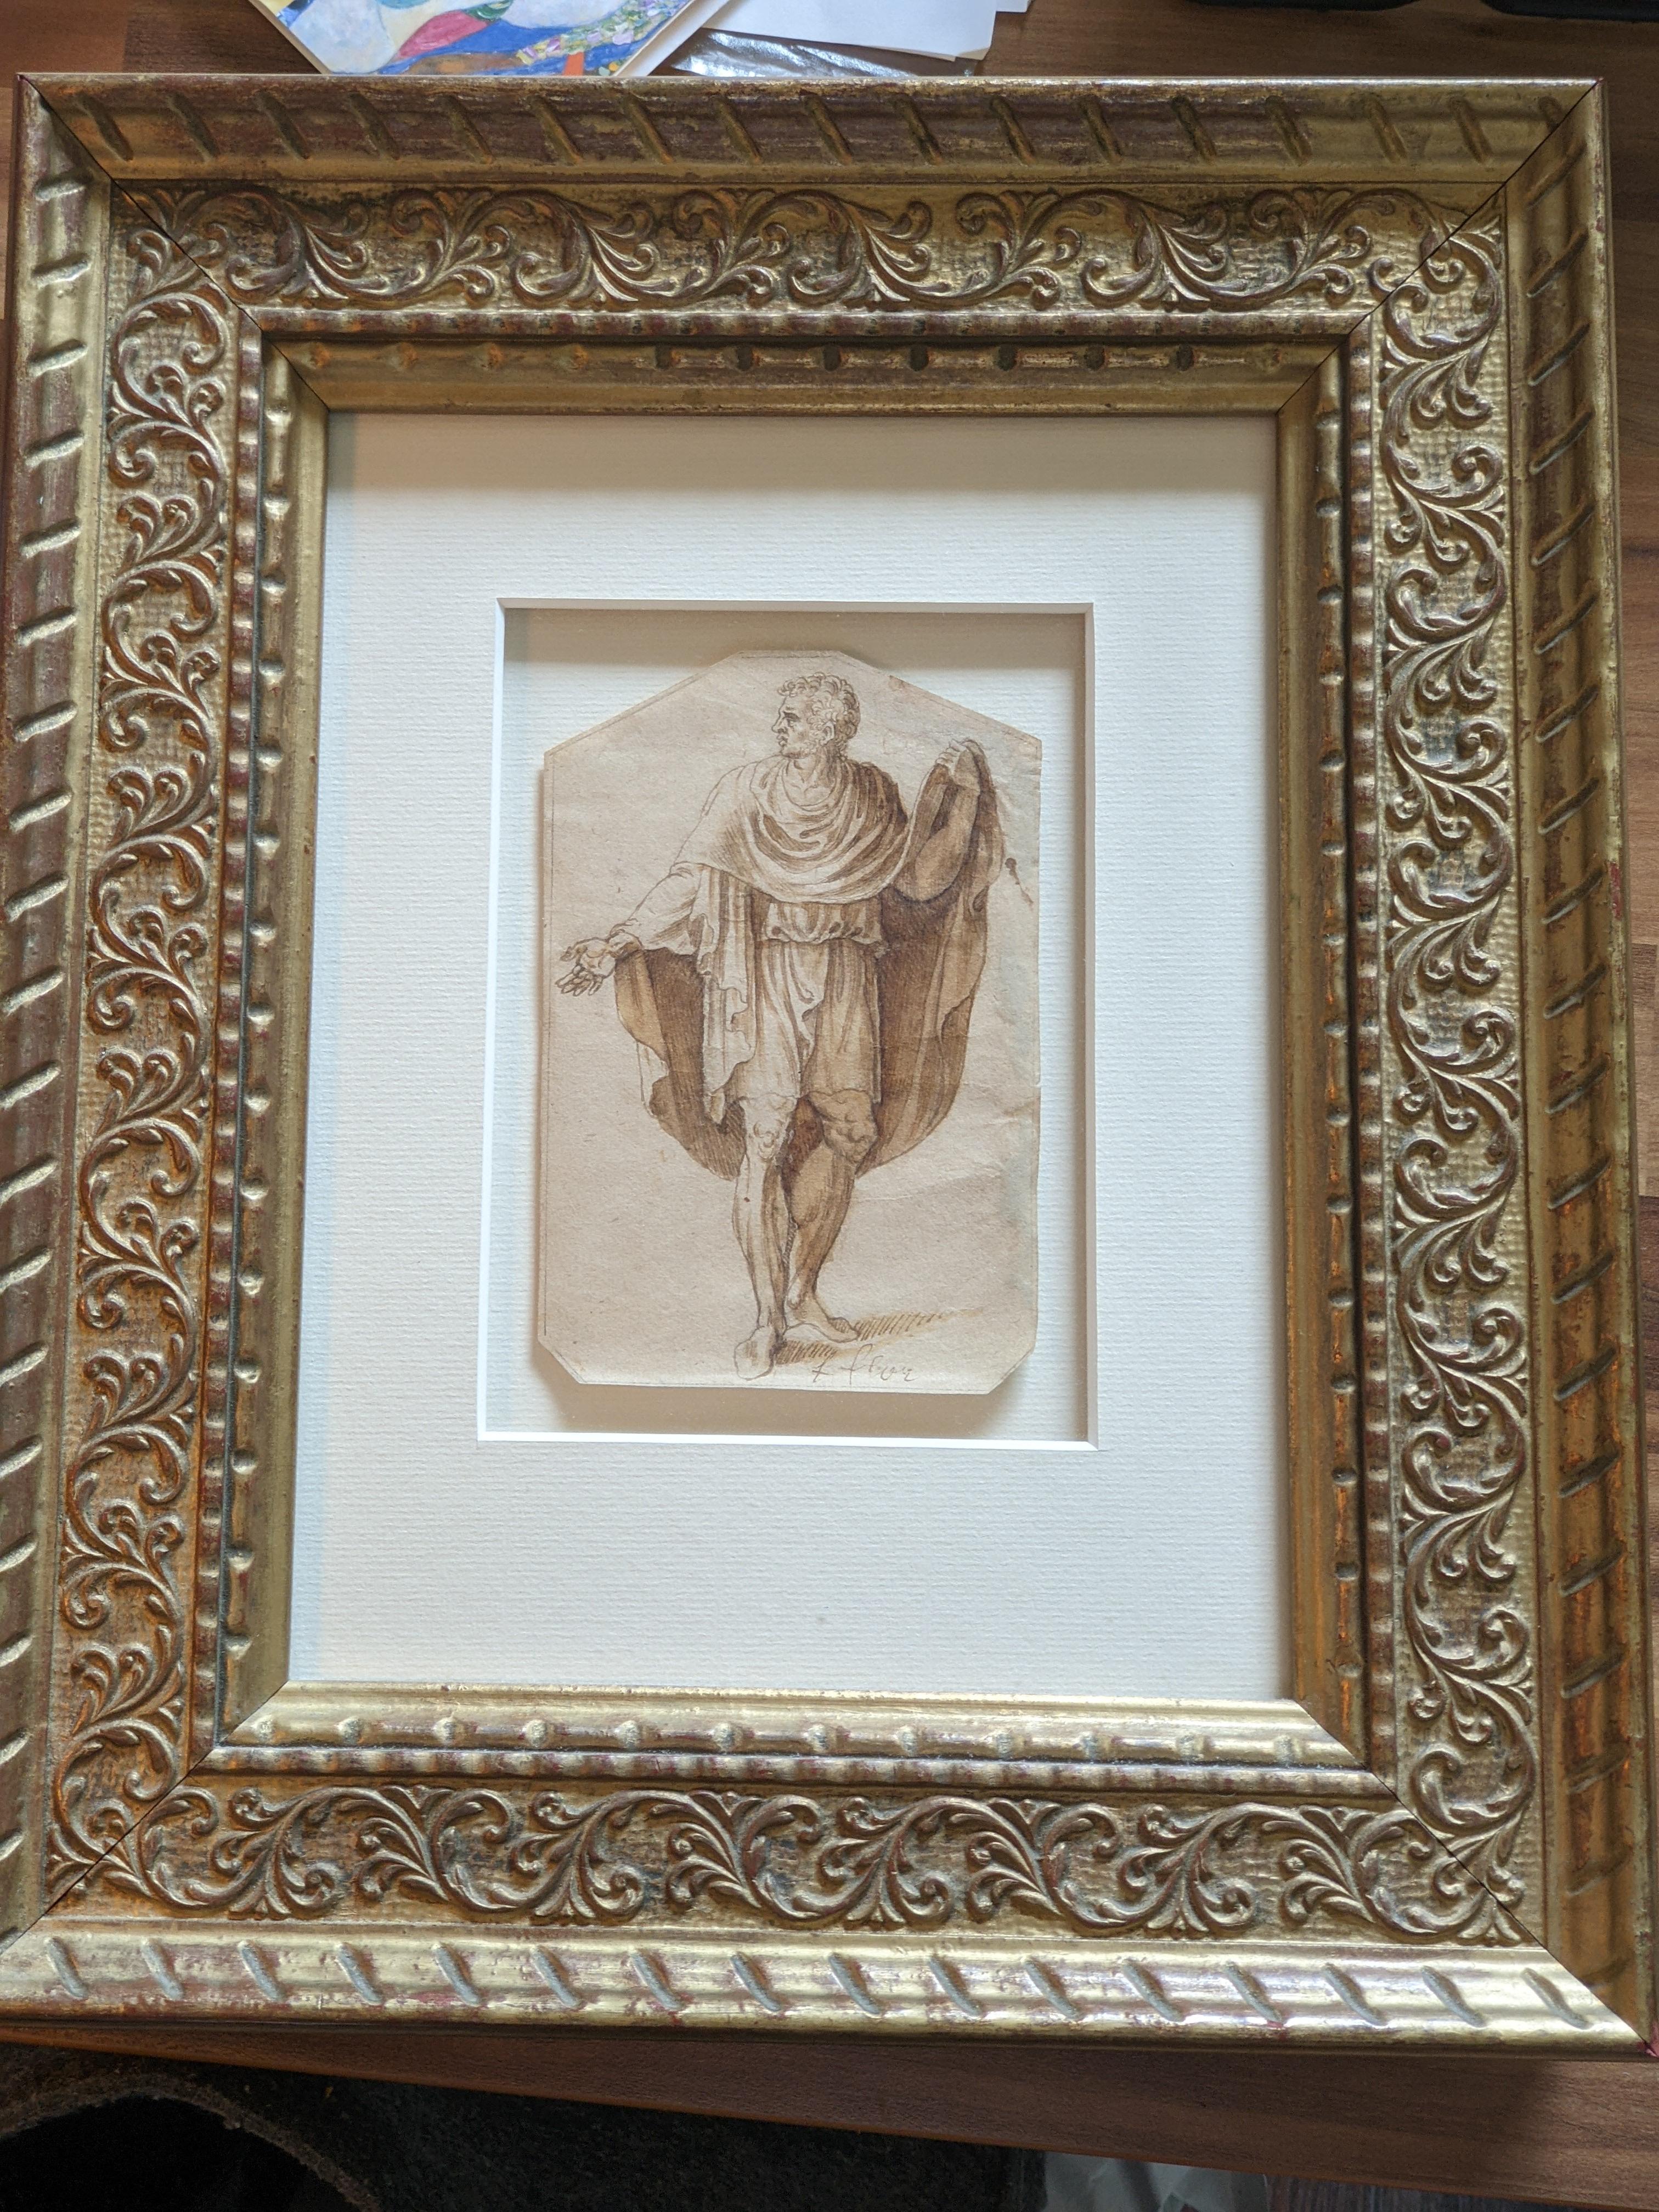 Old Master Drawing by the Circle of Lambert Lombard. Drawing/ Study of a Man in Renaissance Style, later signed 